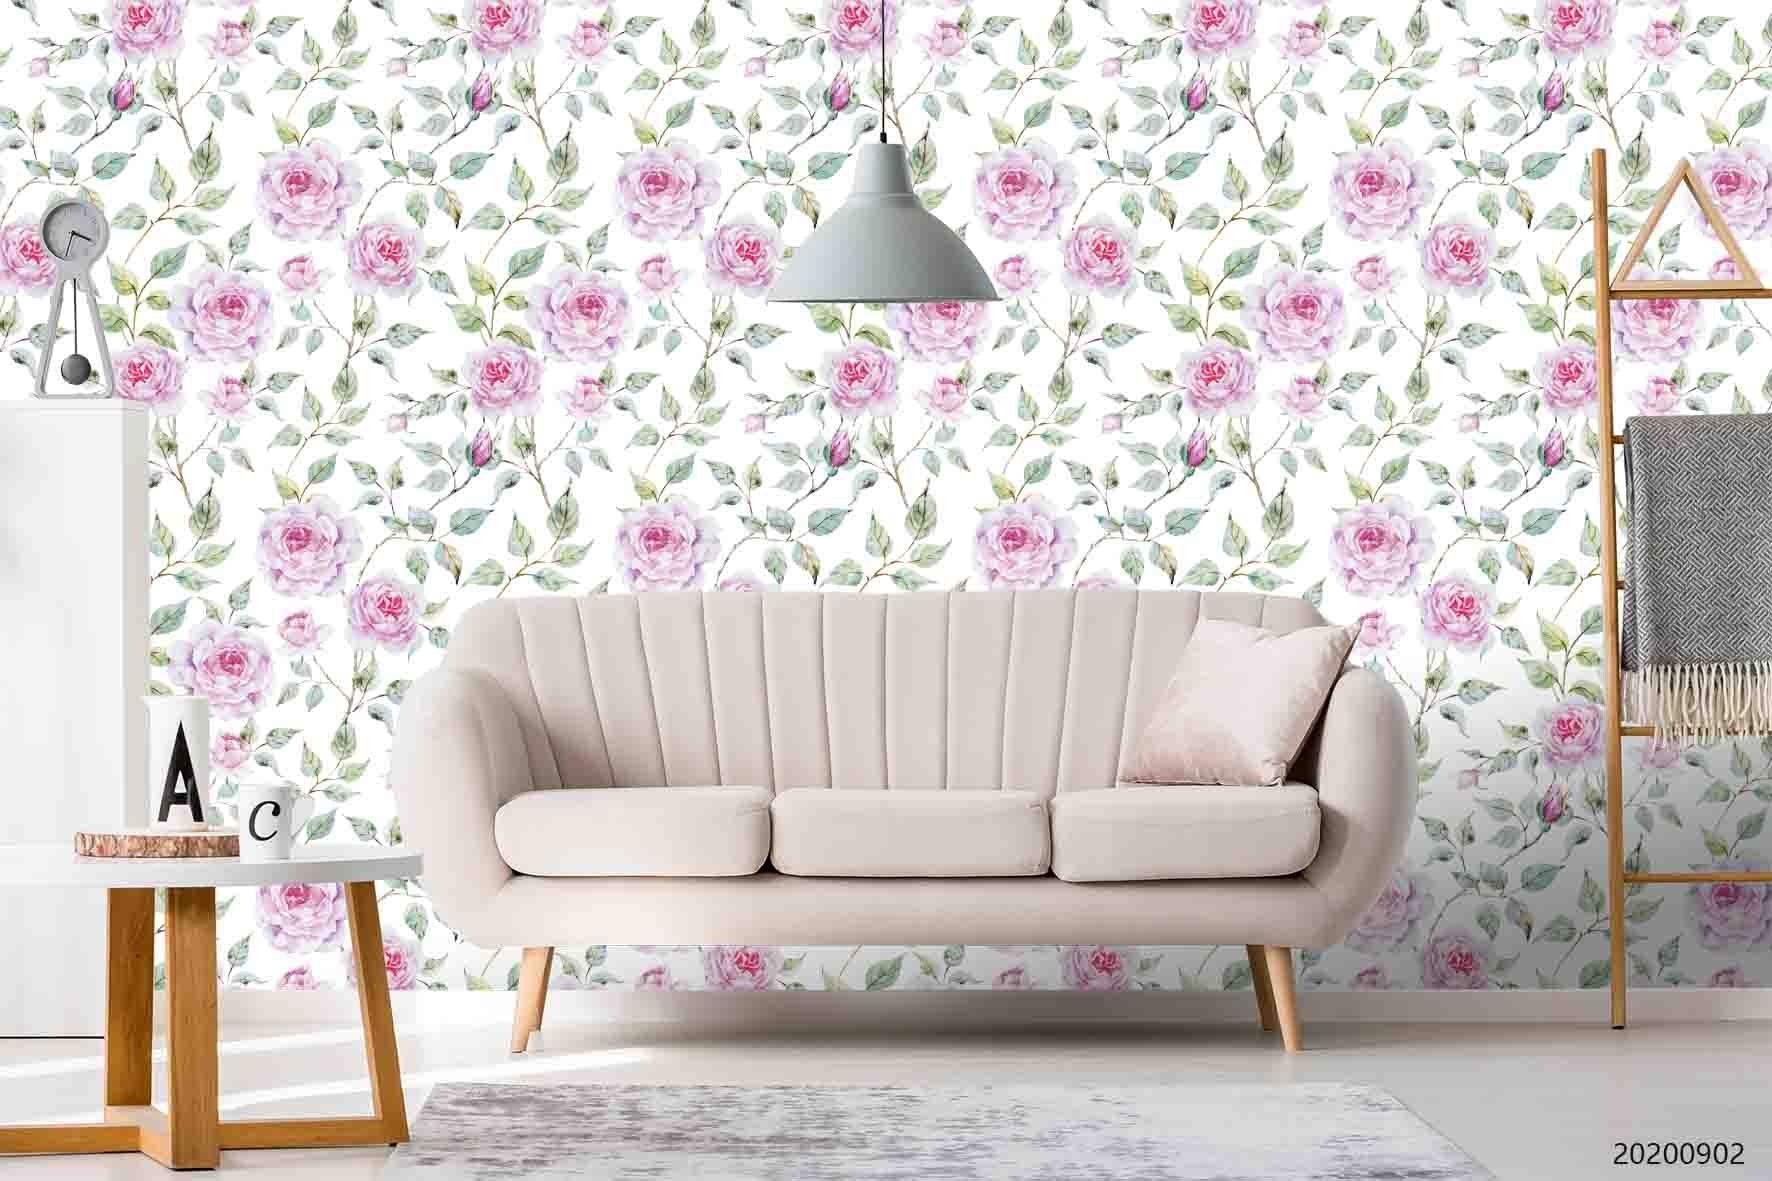 3D Hand Sketching Pink Floral Leaves Plant Wall Mural Wallpaper LXL 1253- Jess Art Decoration